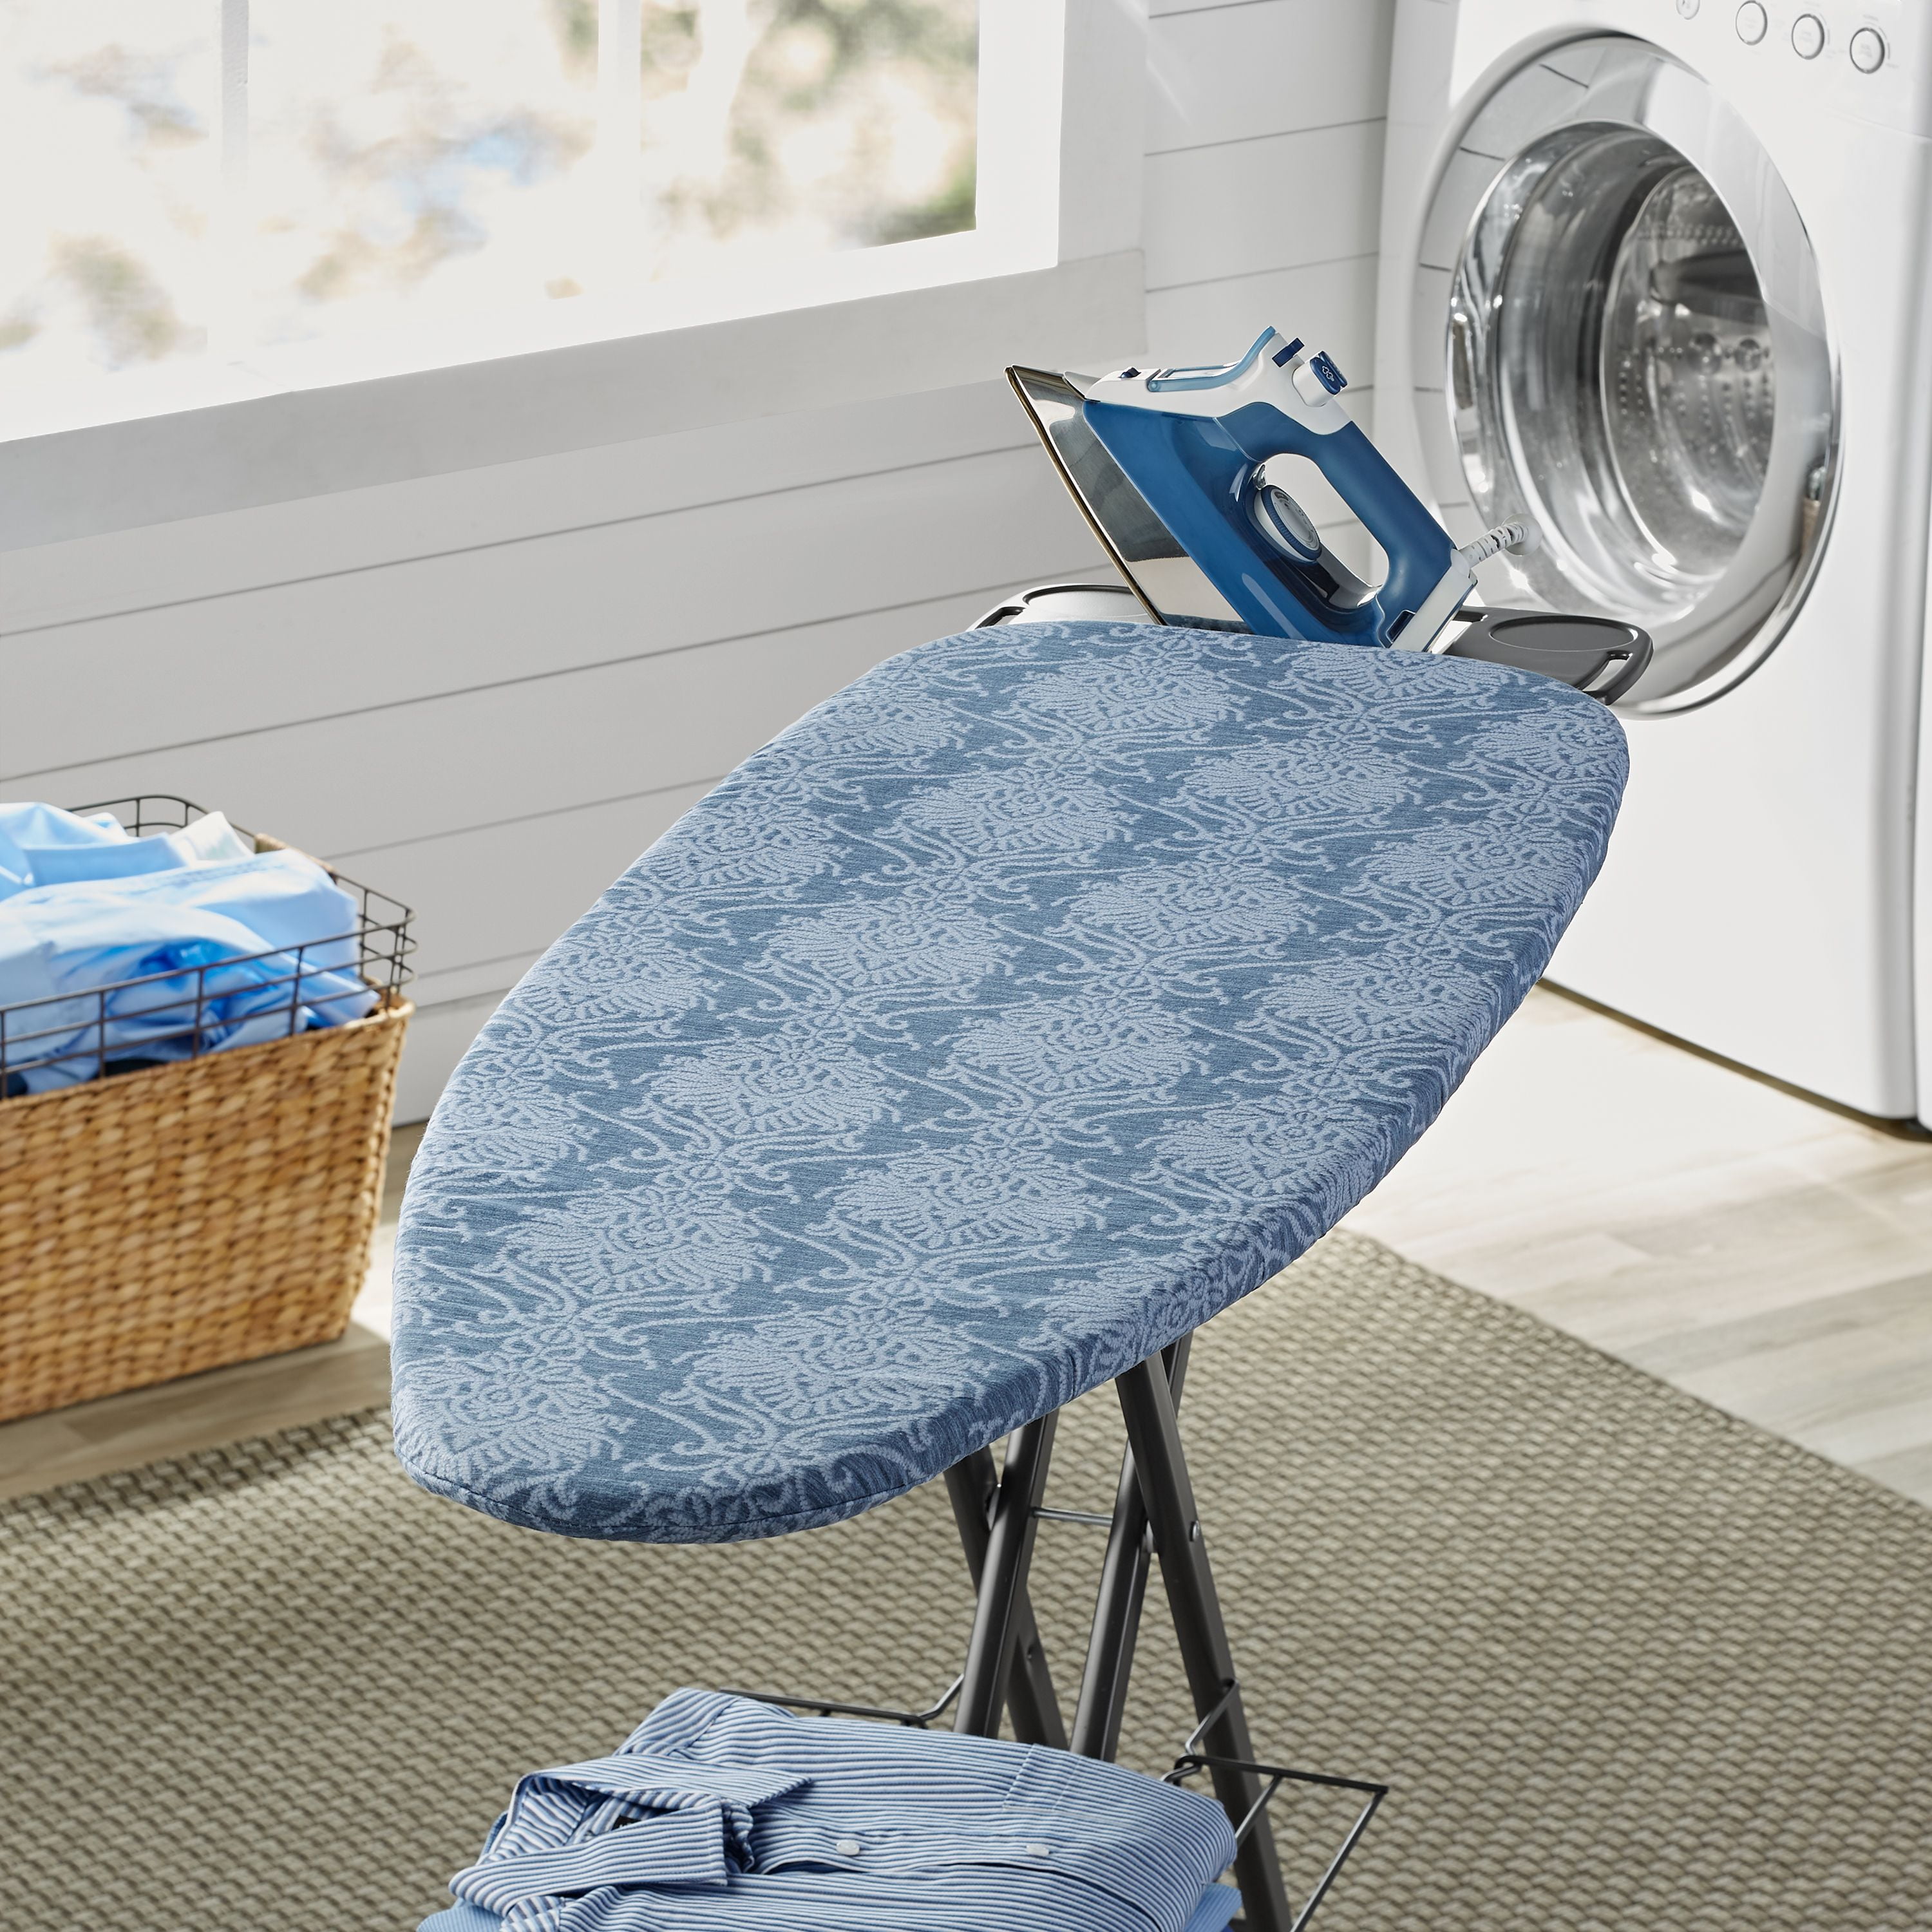 Evelots Plastic Ironing Board Cover & Reviews